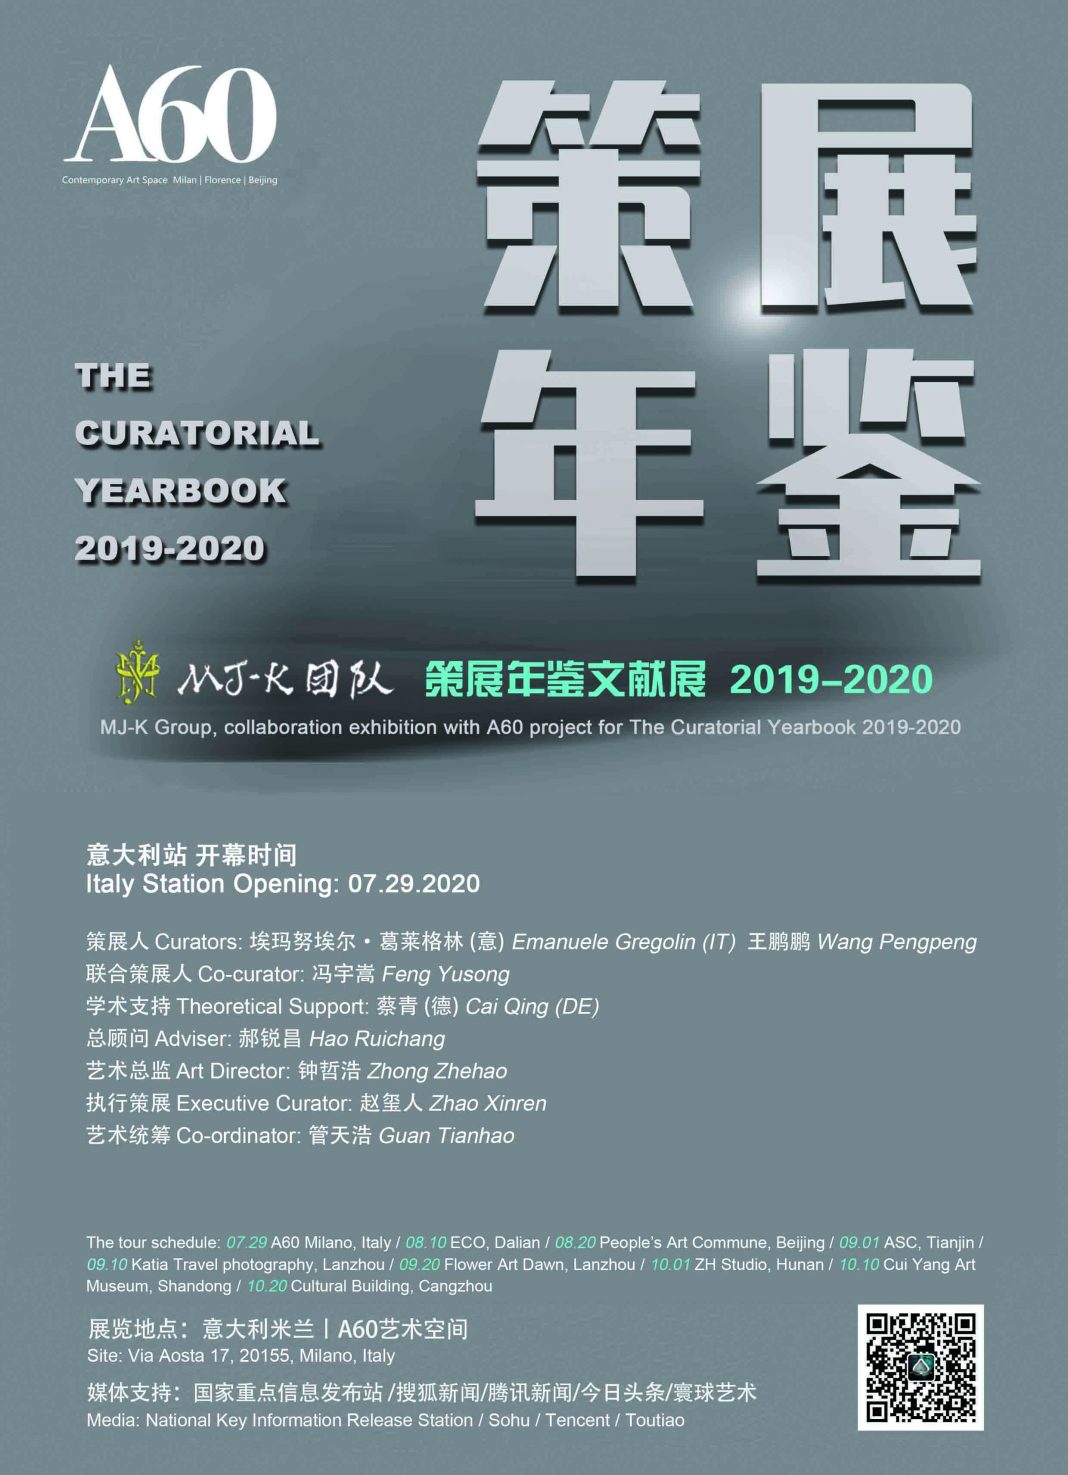 The Curatorial Yearbook 2019-2020https://www.exibart.com/repository/media/formidable/11/The-Curatorial-Yearbook-2019-2020-1068x1475.jpg